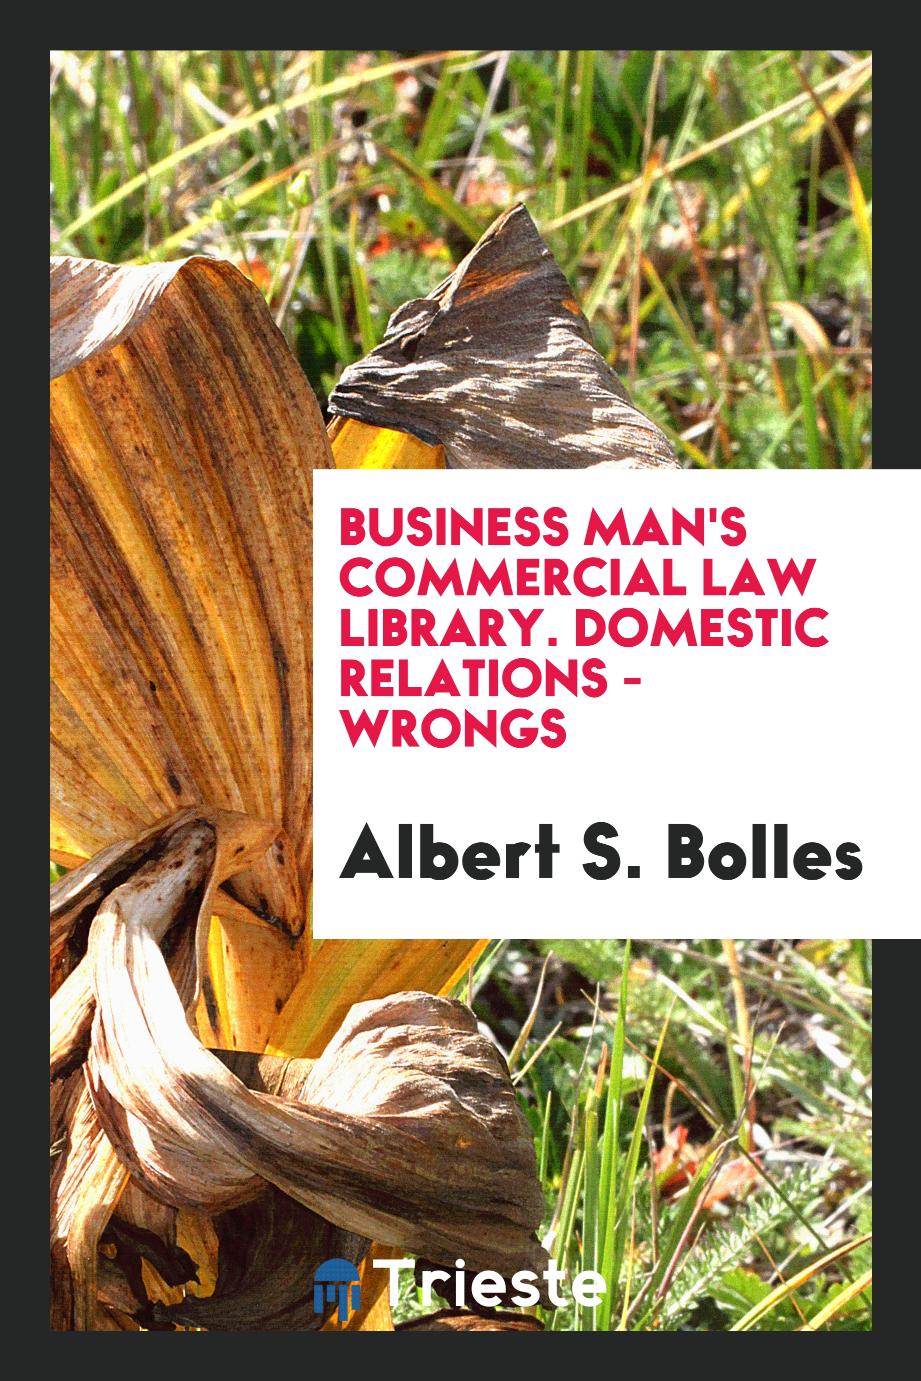 Business Man's Commercial Law Library. Domestic Relations - Wrongs